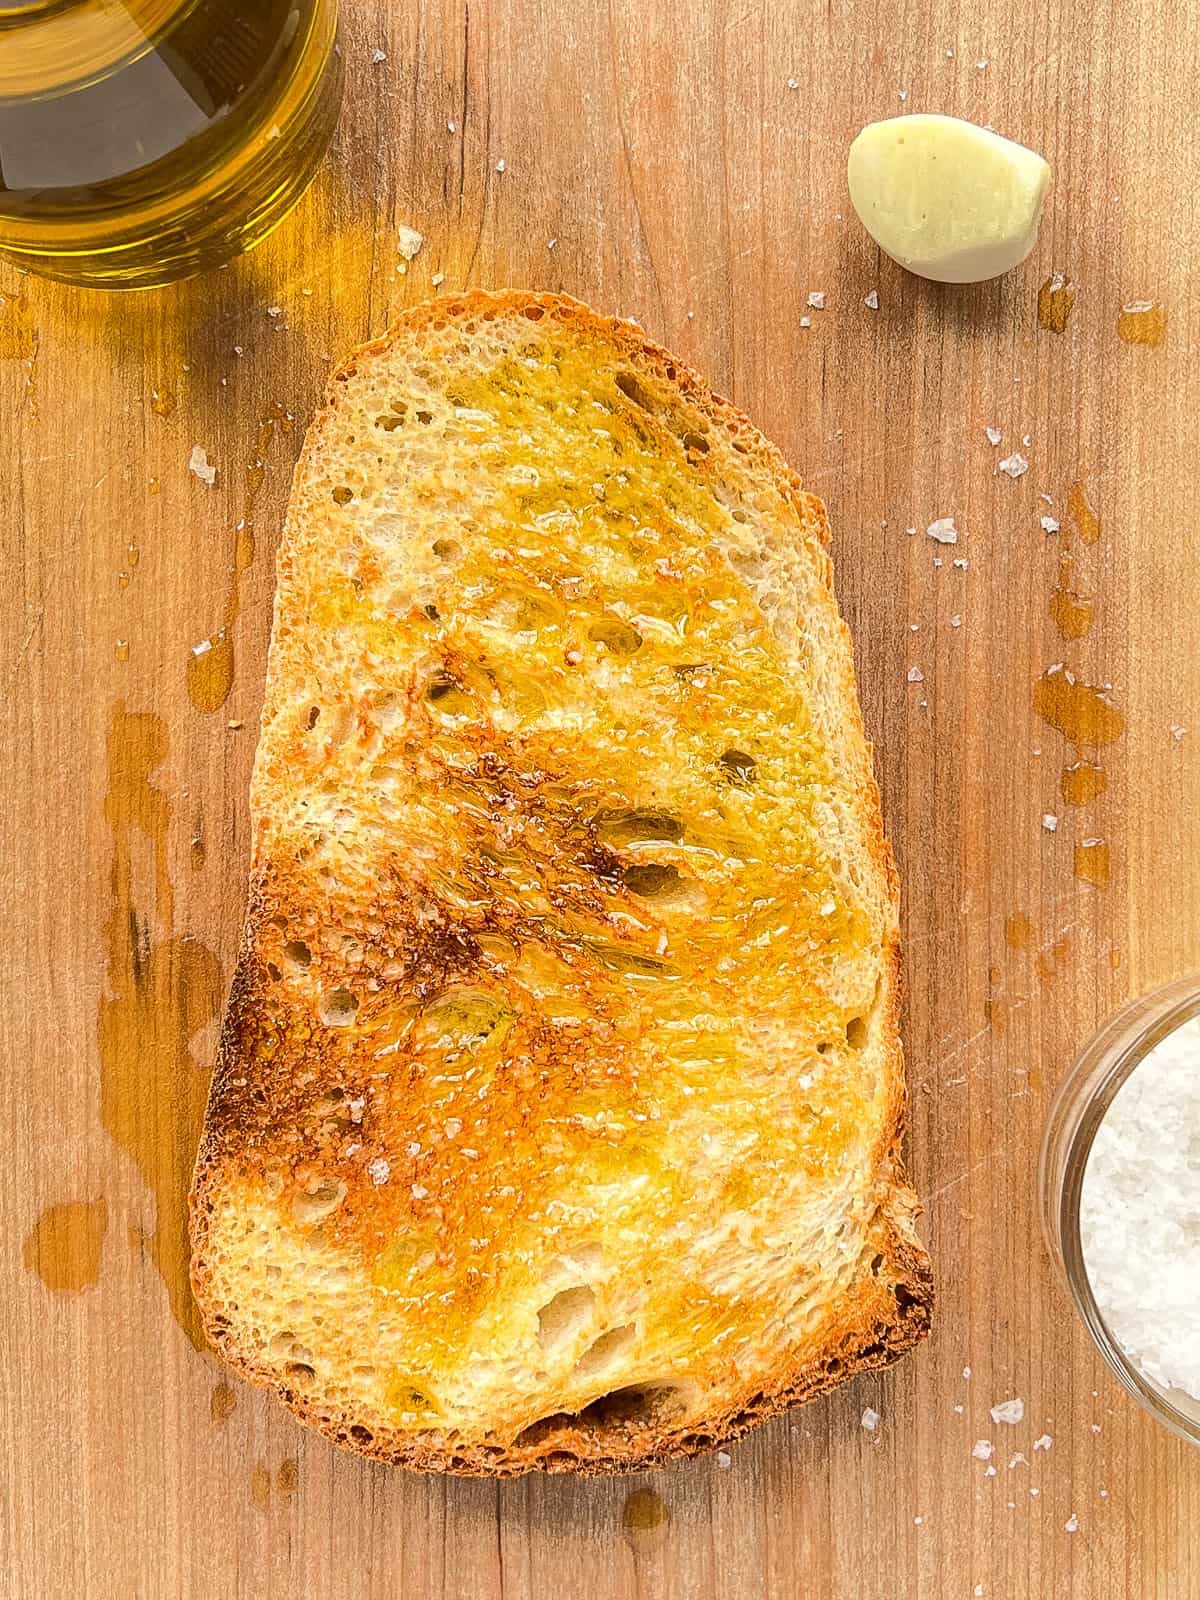 An image of golden garlic toast on a wooden cutting board.